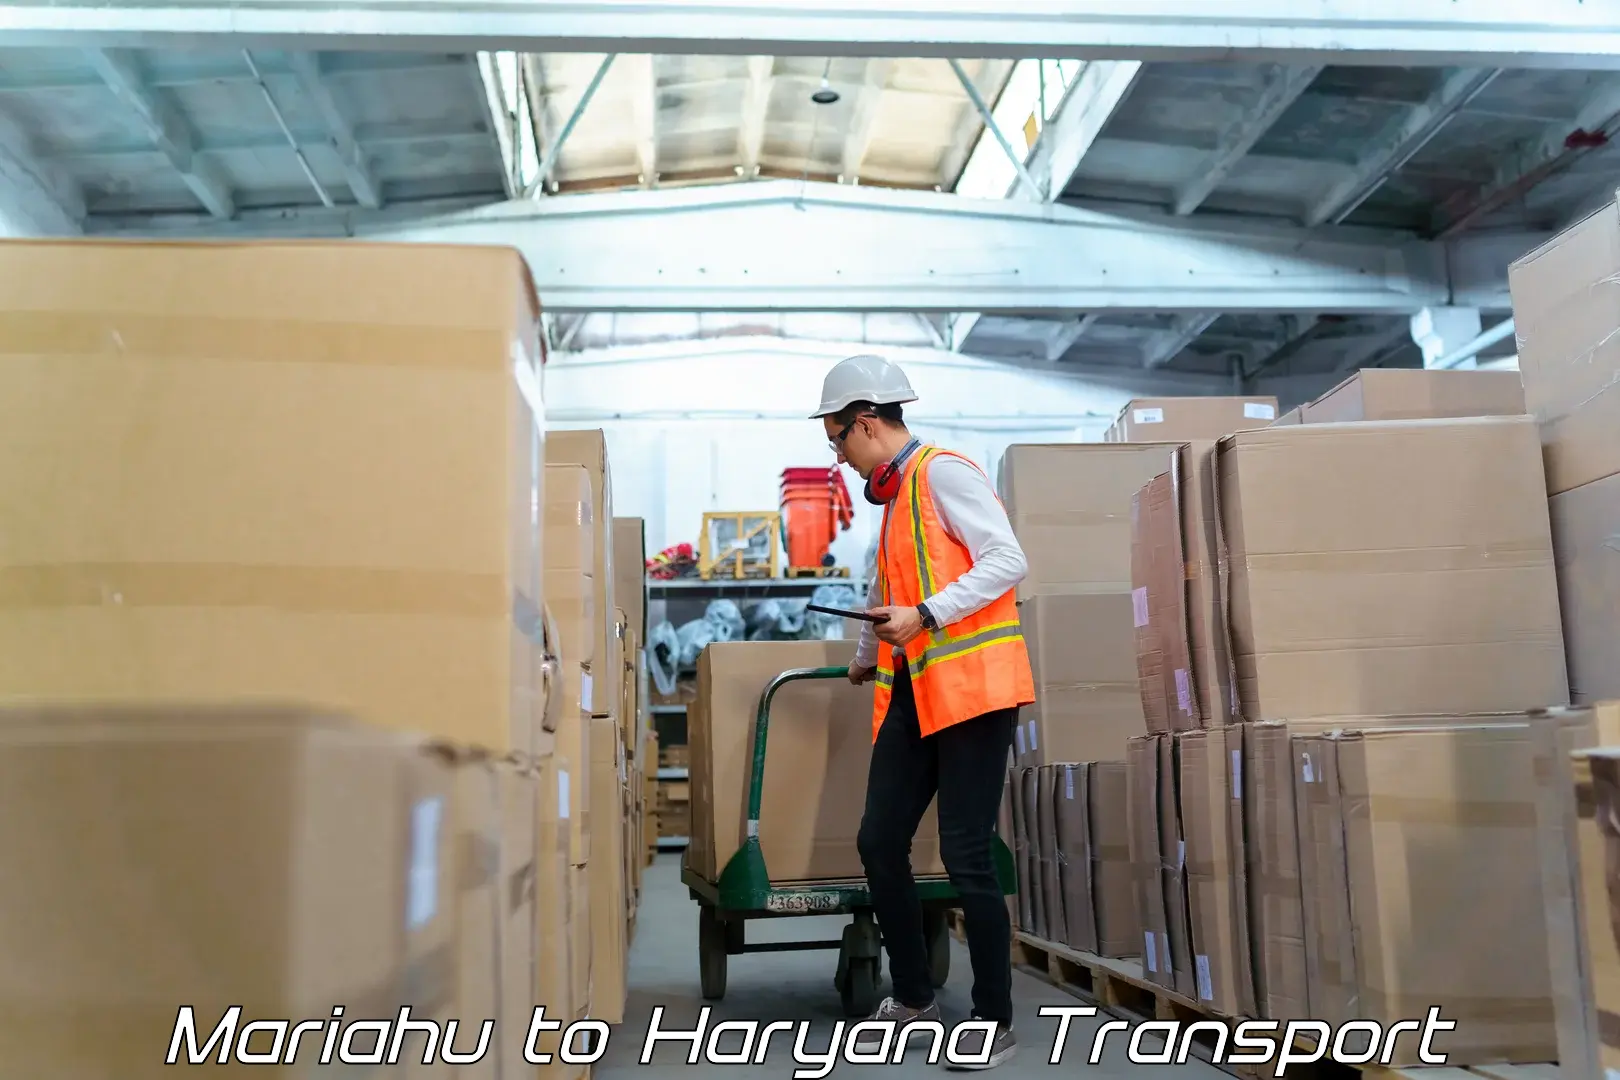 Air freight transport services Mariahu to Buguda